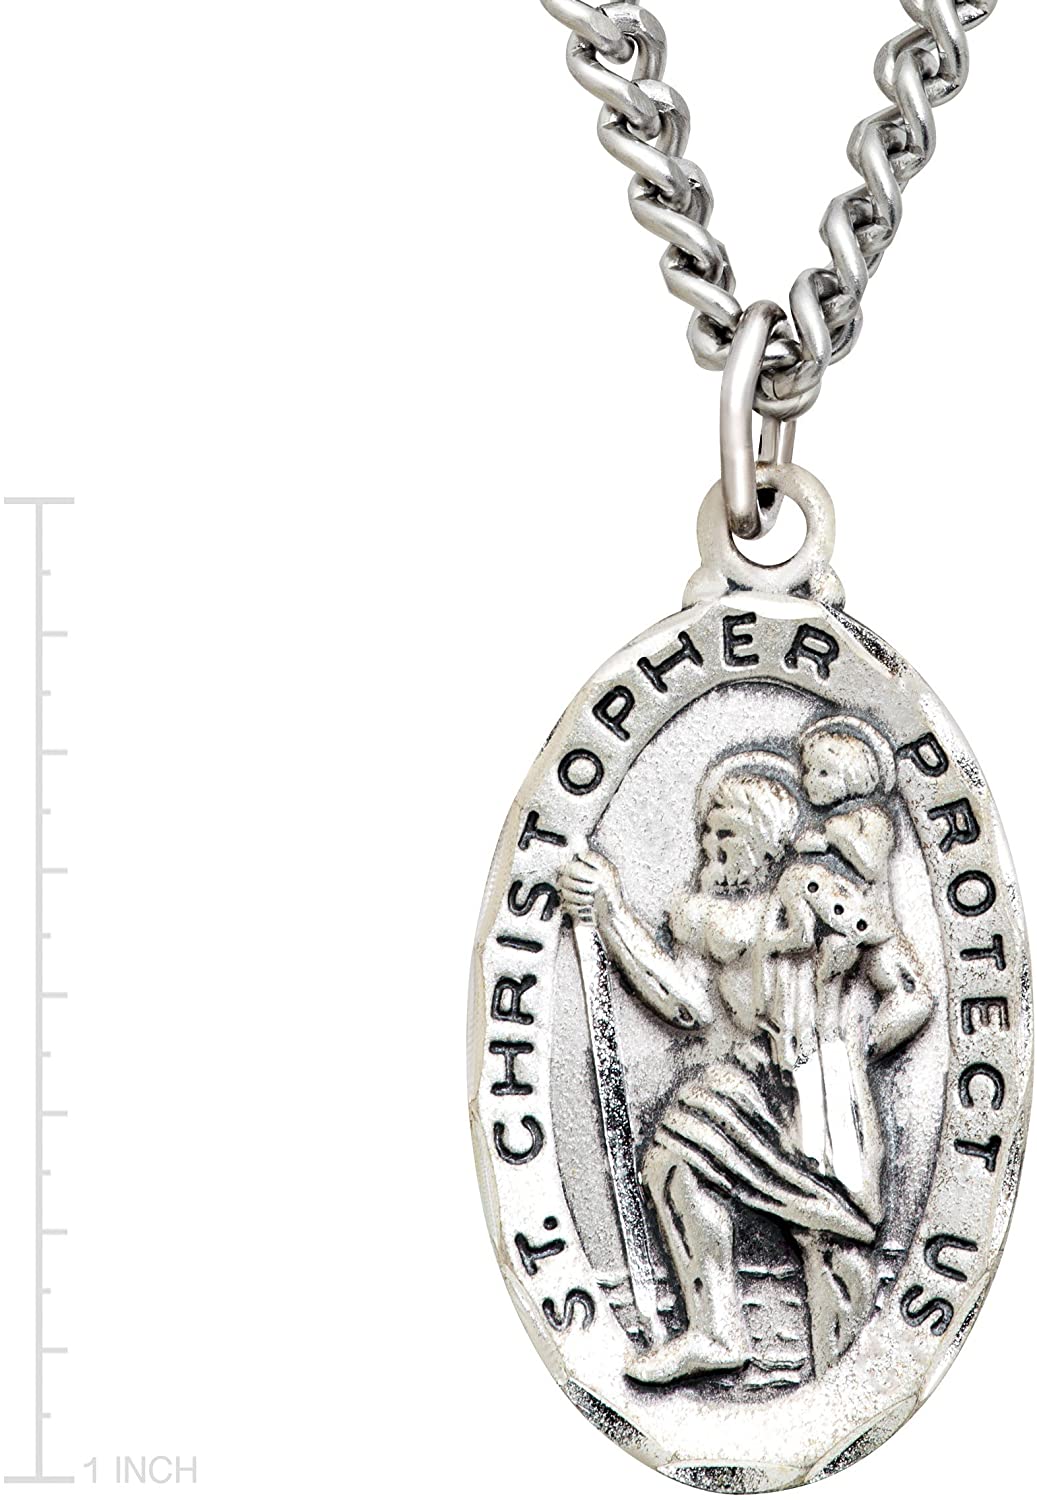 Oval St. Christopher Medal Sterling Silver Pendant Necklace, 24" Chain - image 5 of 7